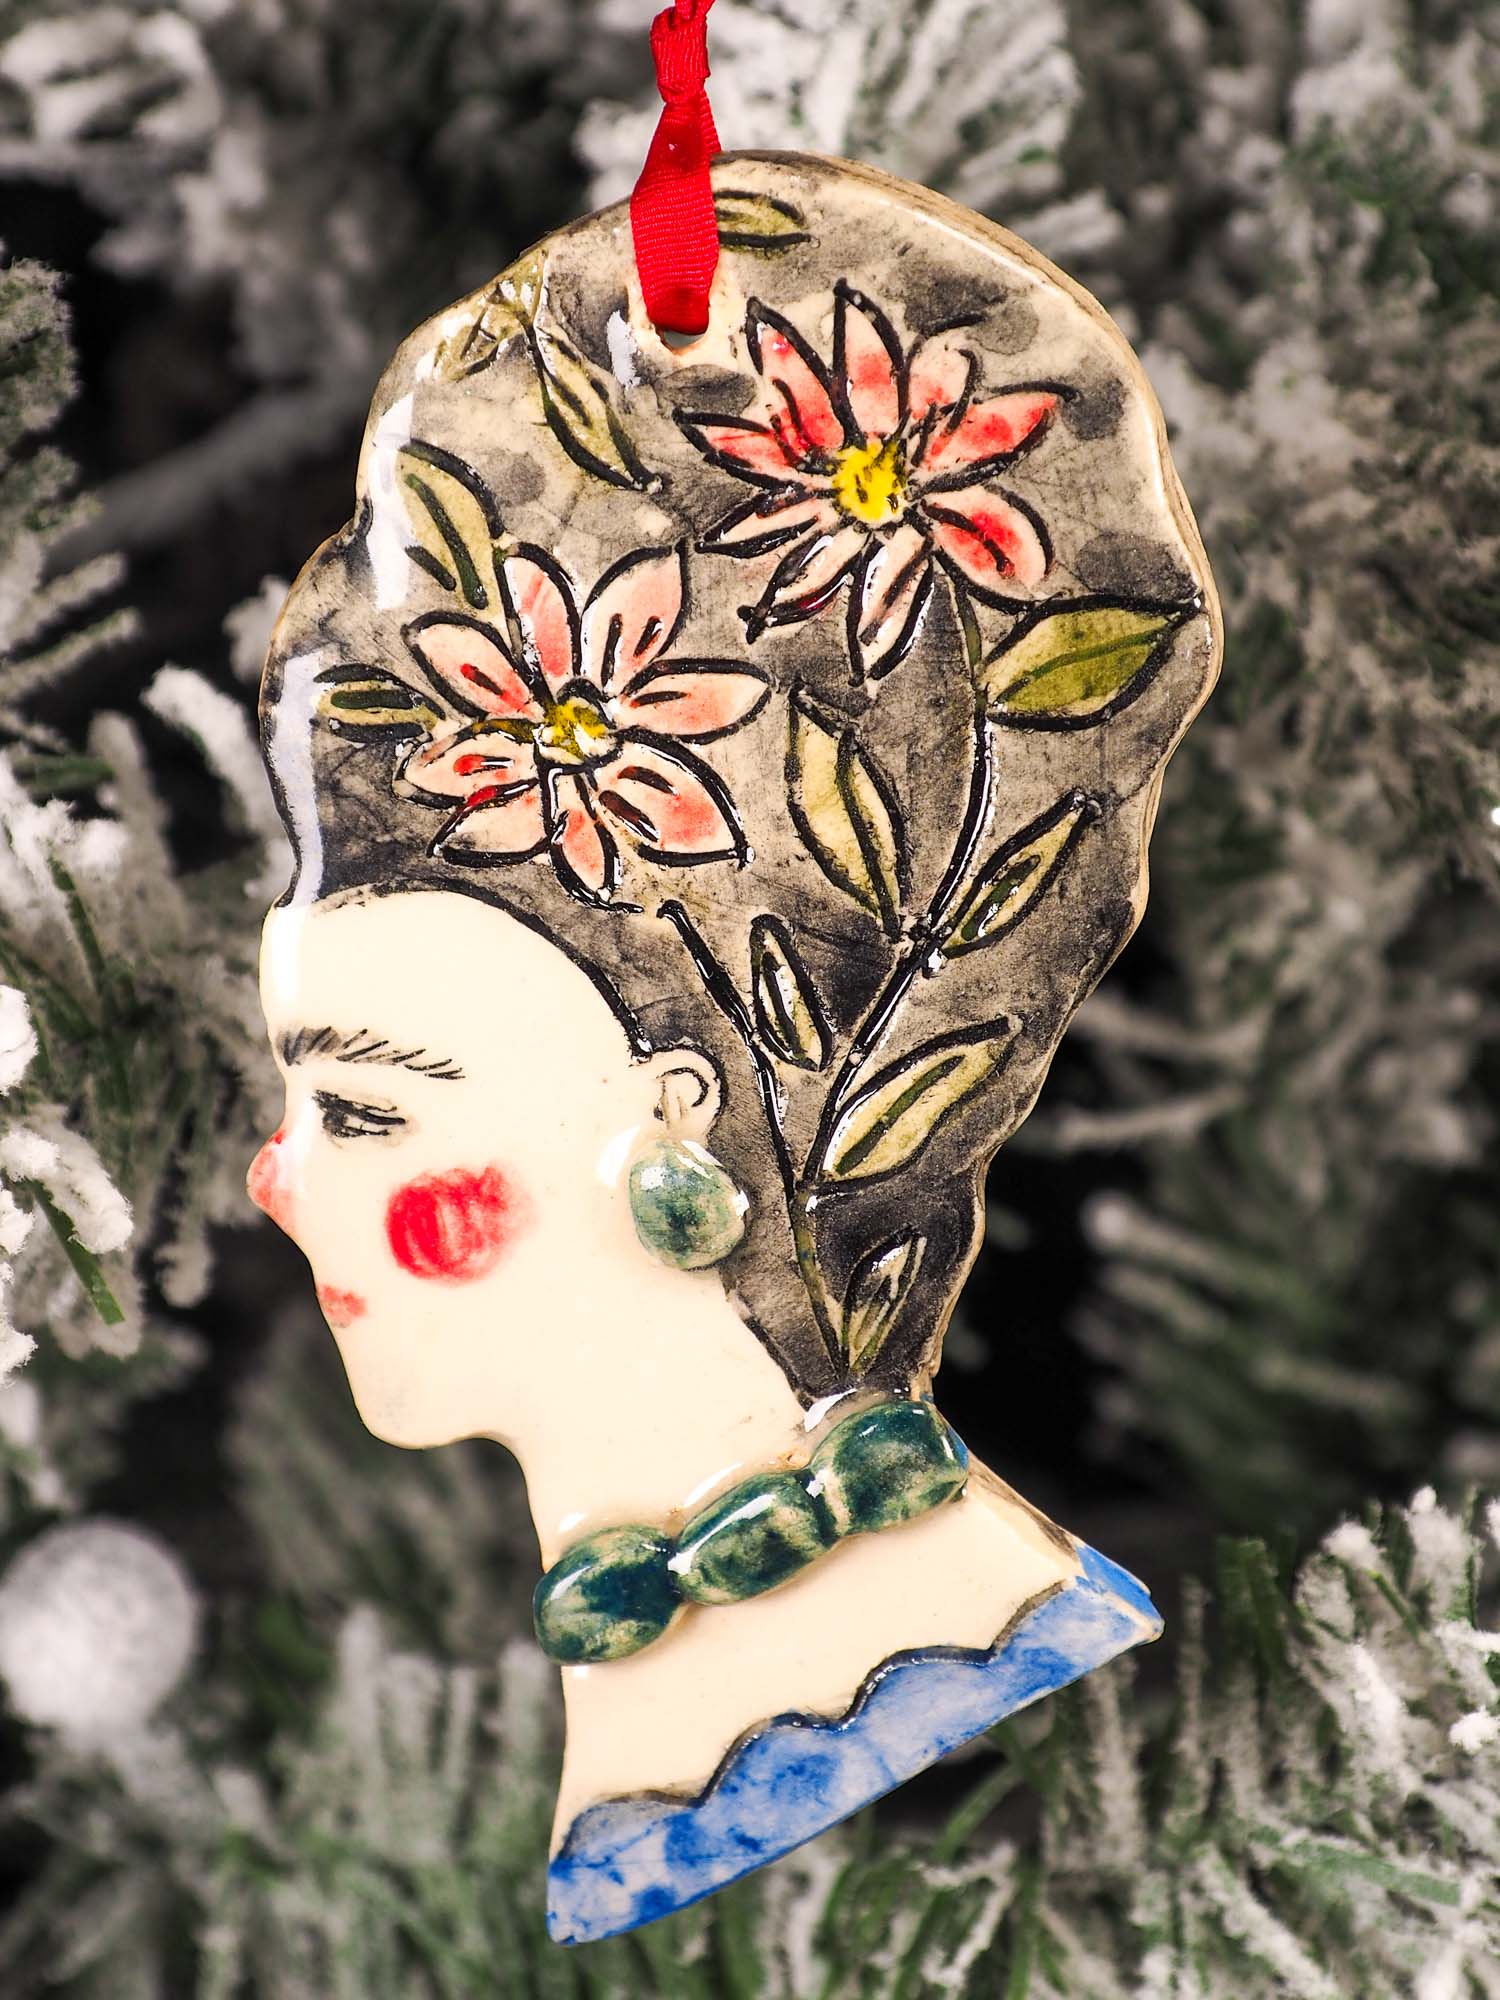 An original Christmas Holiday tree round glazed ceramic hanging ornament handmade by Idania Salcido, the artist behind Danita Art. Glazed carved sgraffito stoneware, hand painted and decorated, it is illustrated by hand with flowers, hearts, leaves, nature patterns and the face of Frida Kahlo.